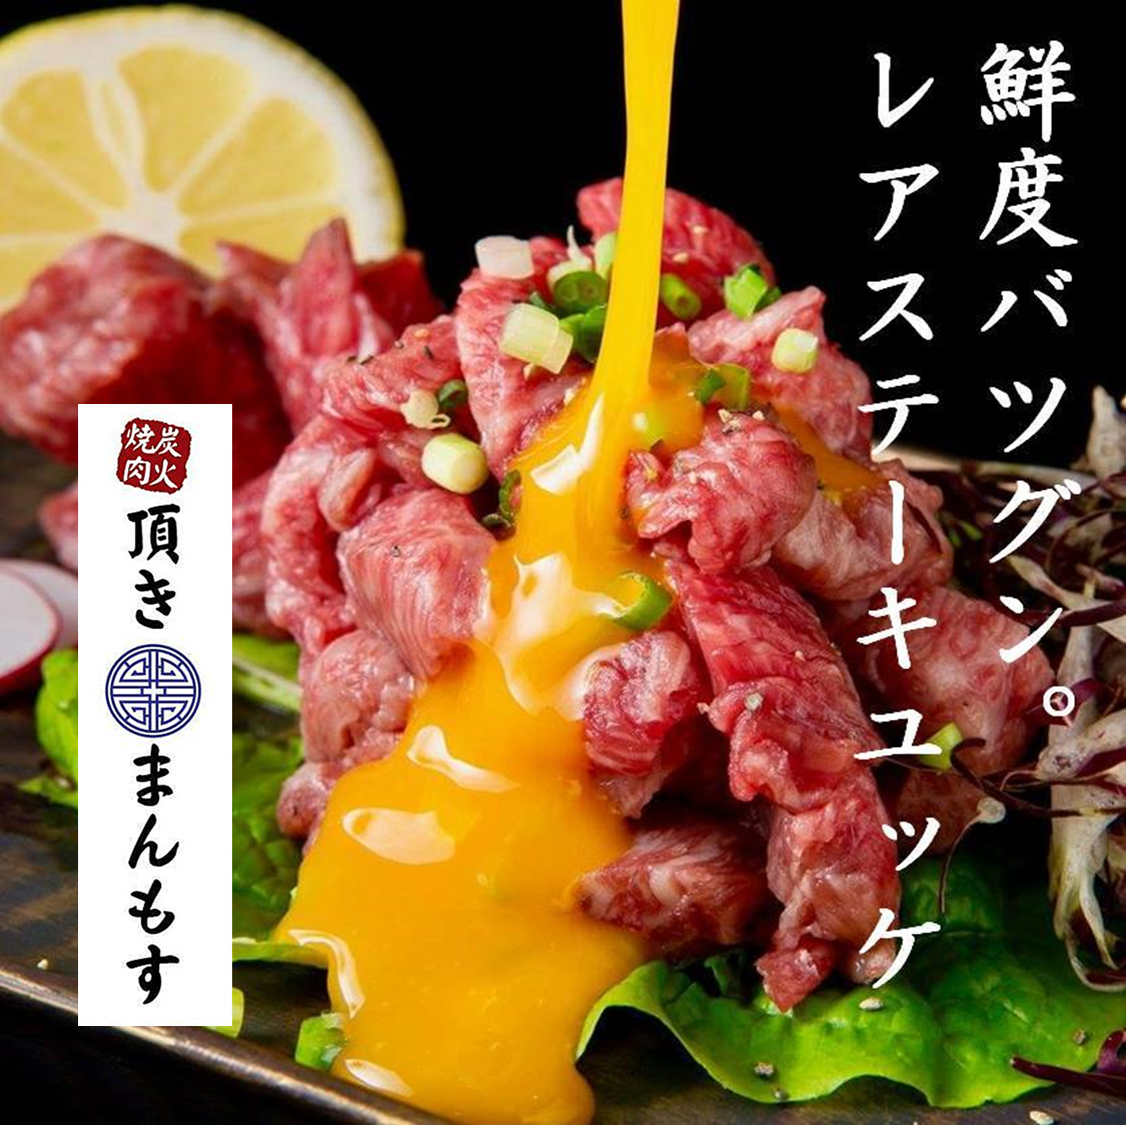 Stores of Chika station where you can enjoy Kuroge Wagyu of rank A5 ☆ Please enjoy fine meat ♪